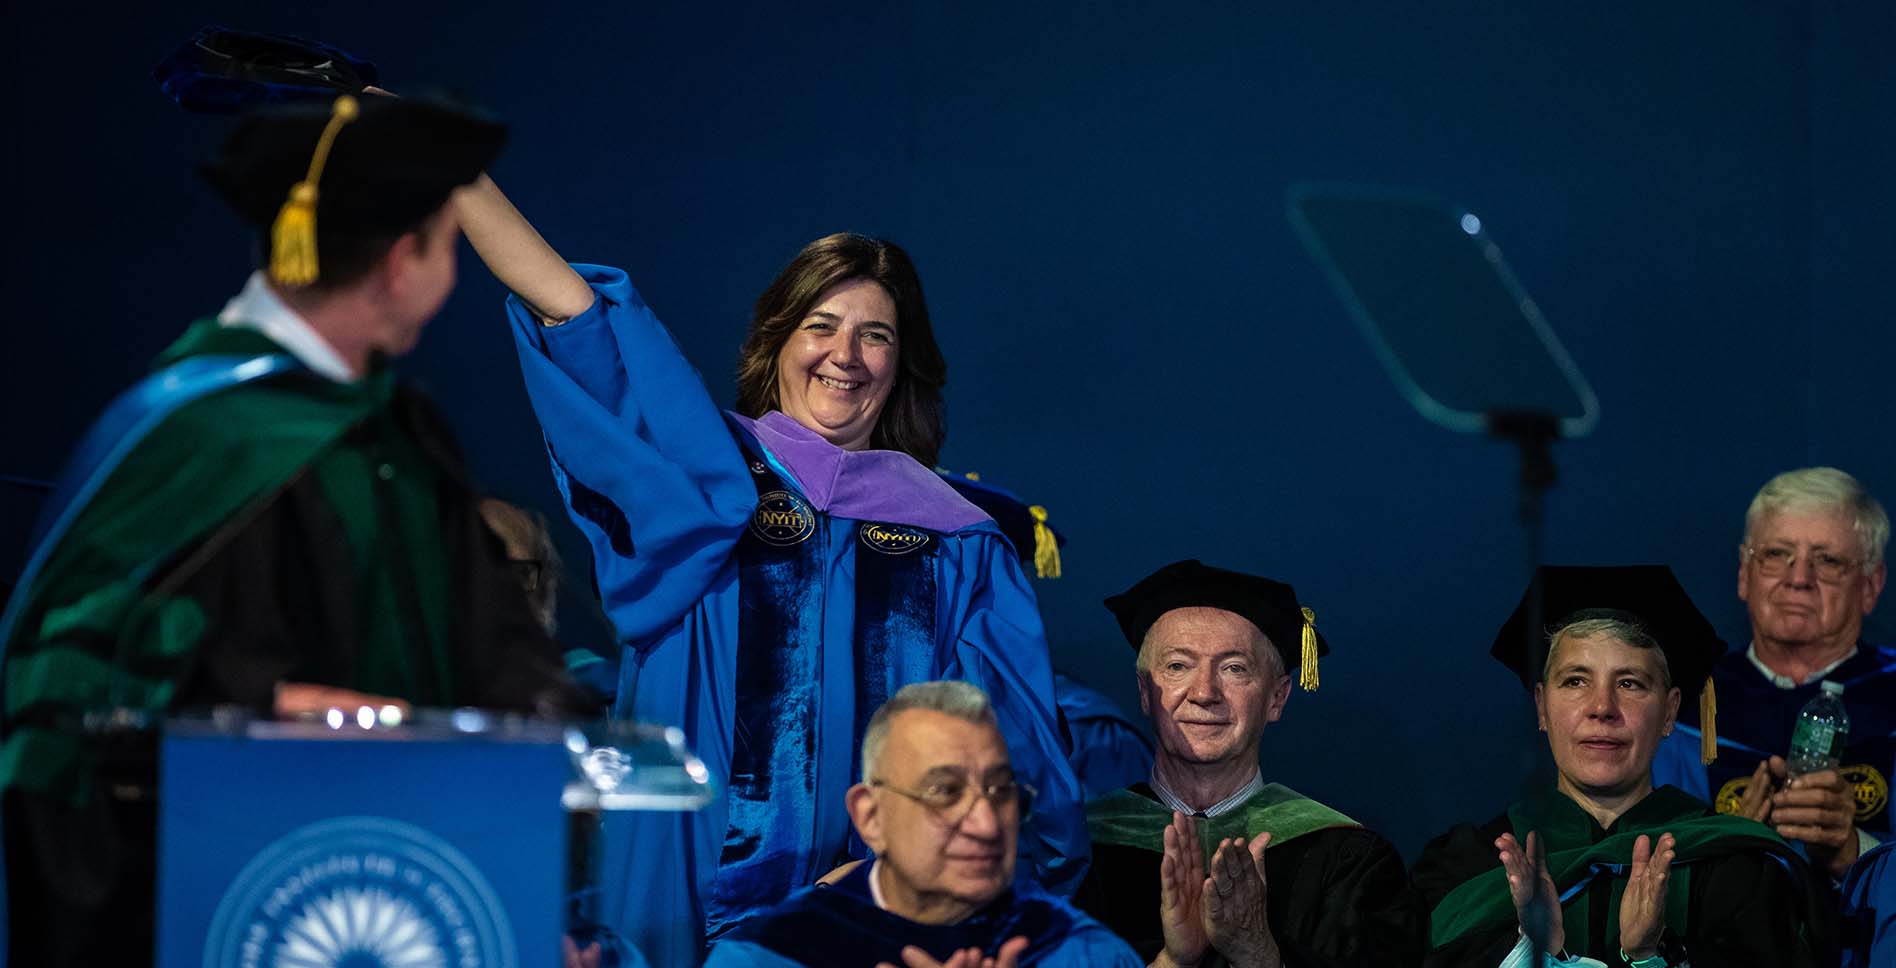 Dean Perbellini receiving applause at Commencement